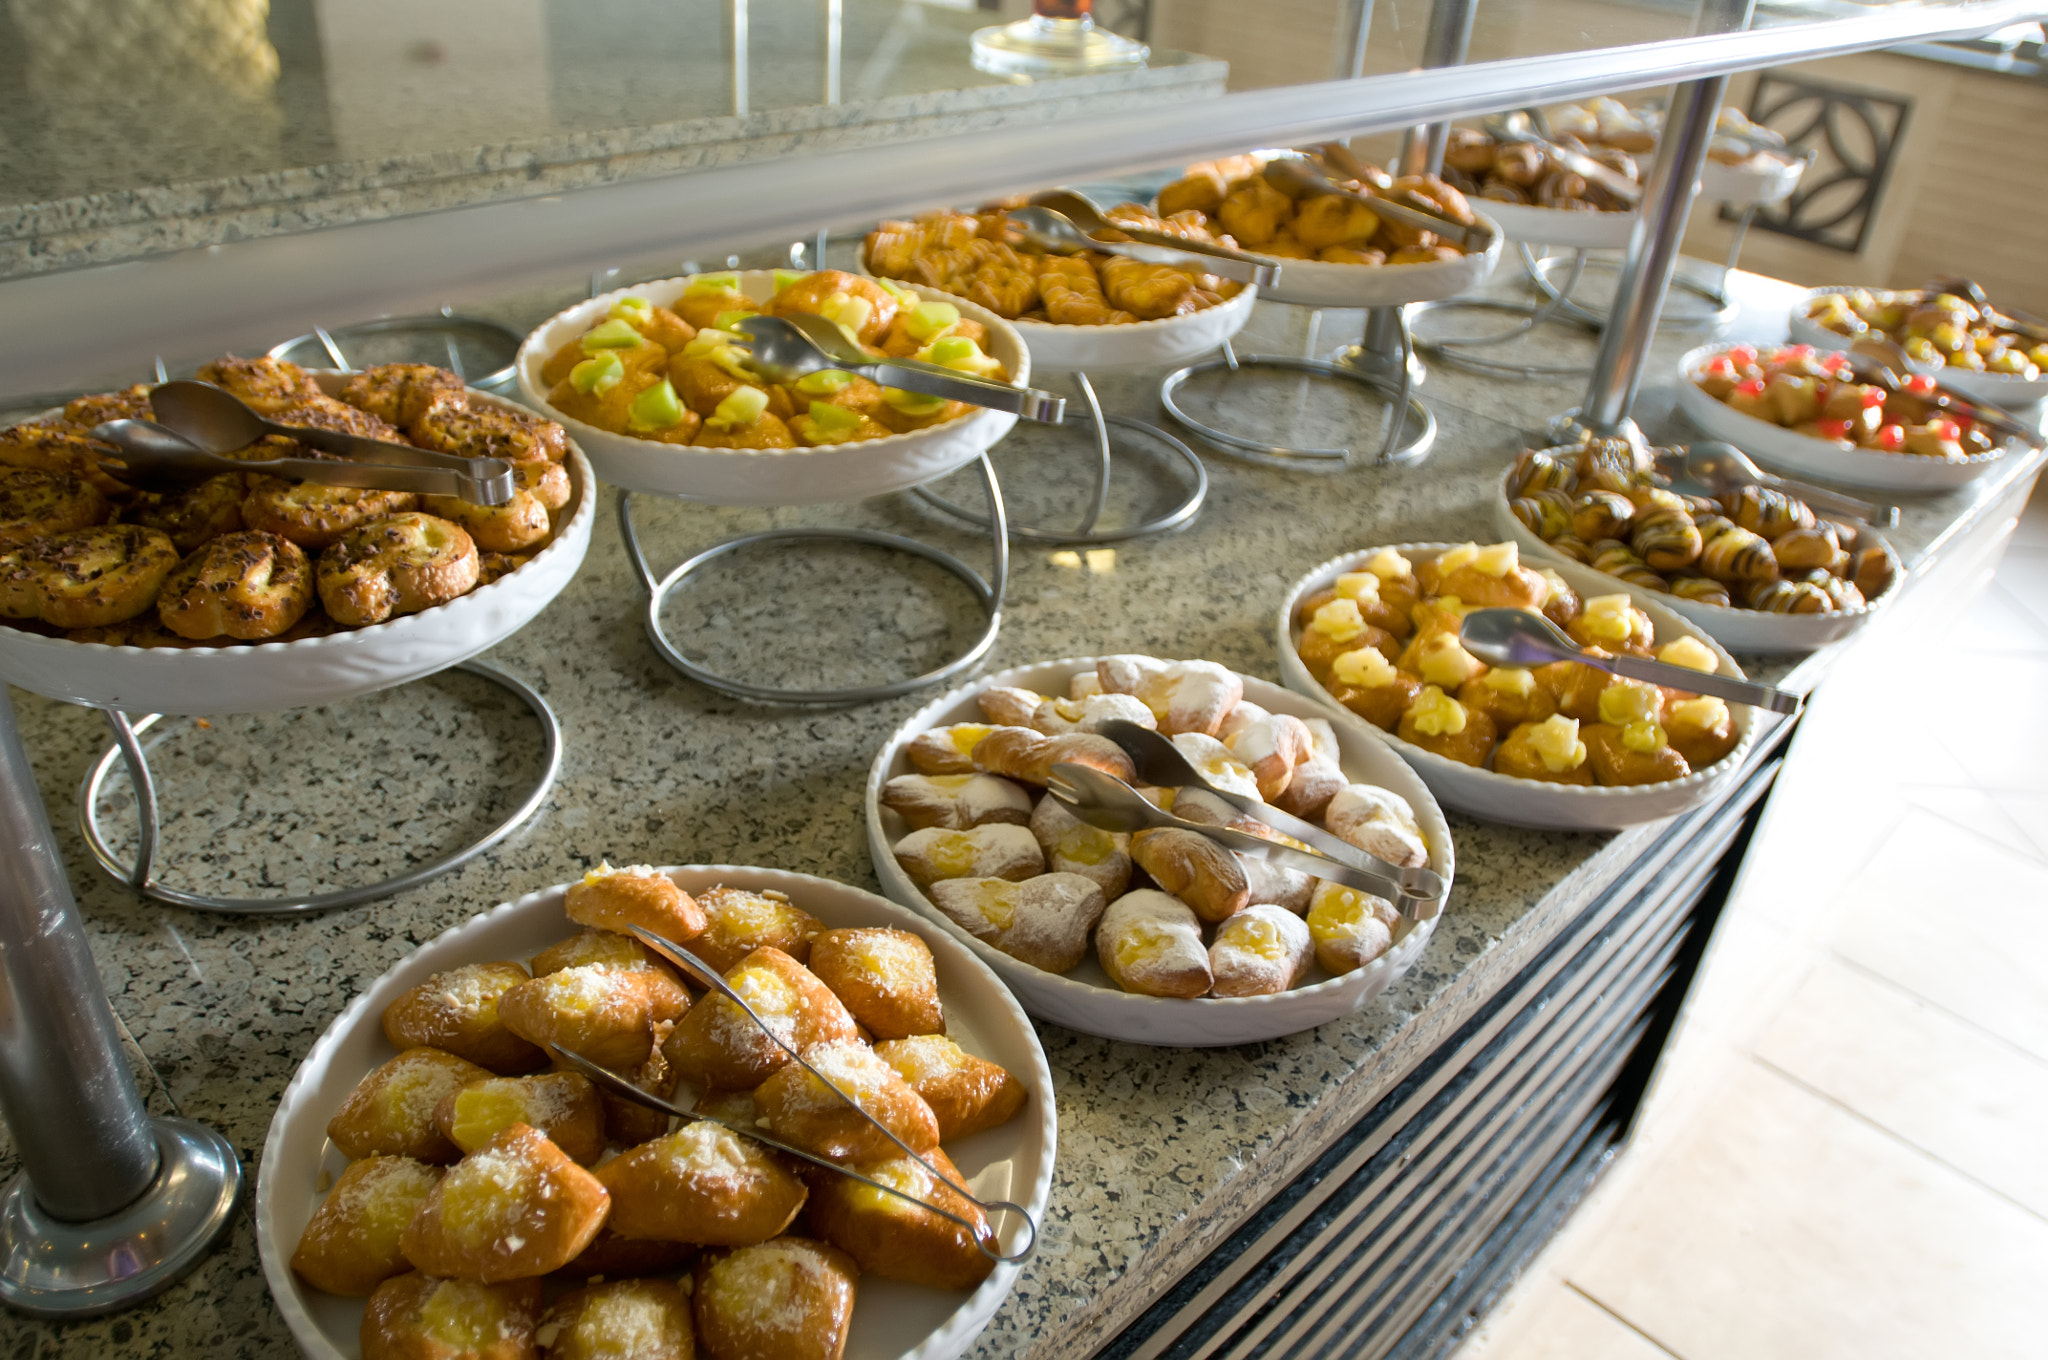 Nikon D300 sample photo. Bakery and sweets in a hotel photography